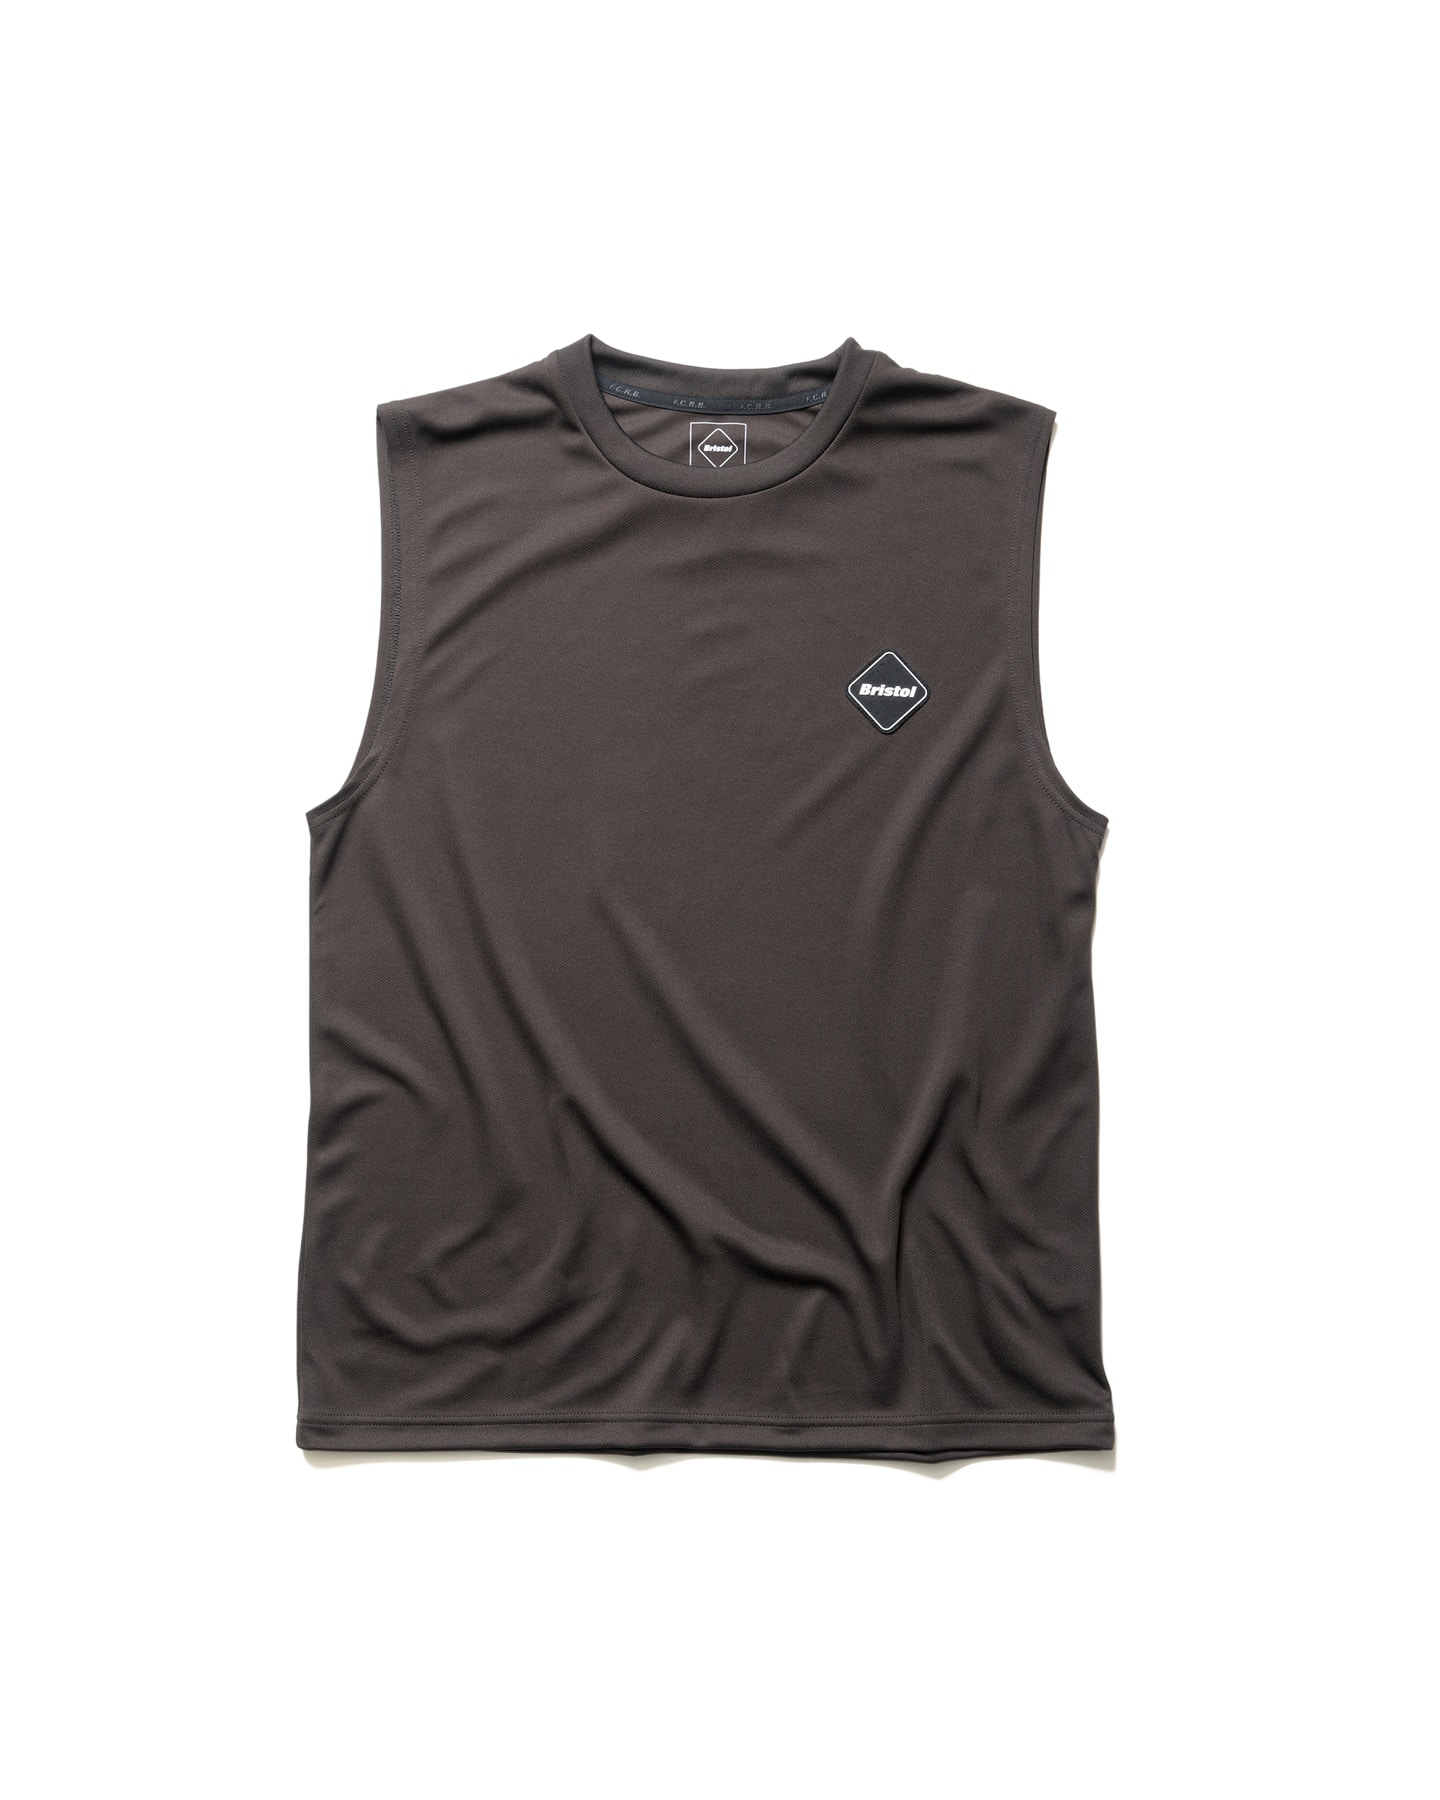 L FCRB 23AW NO SLEEVE TRAINING TOP BROWN-